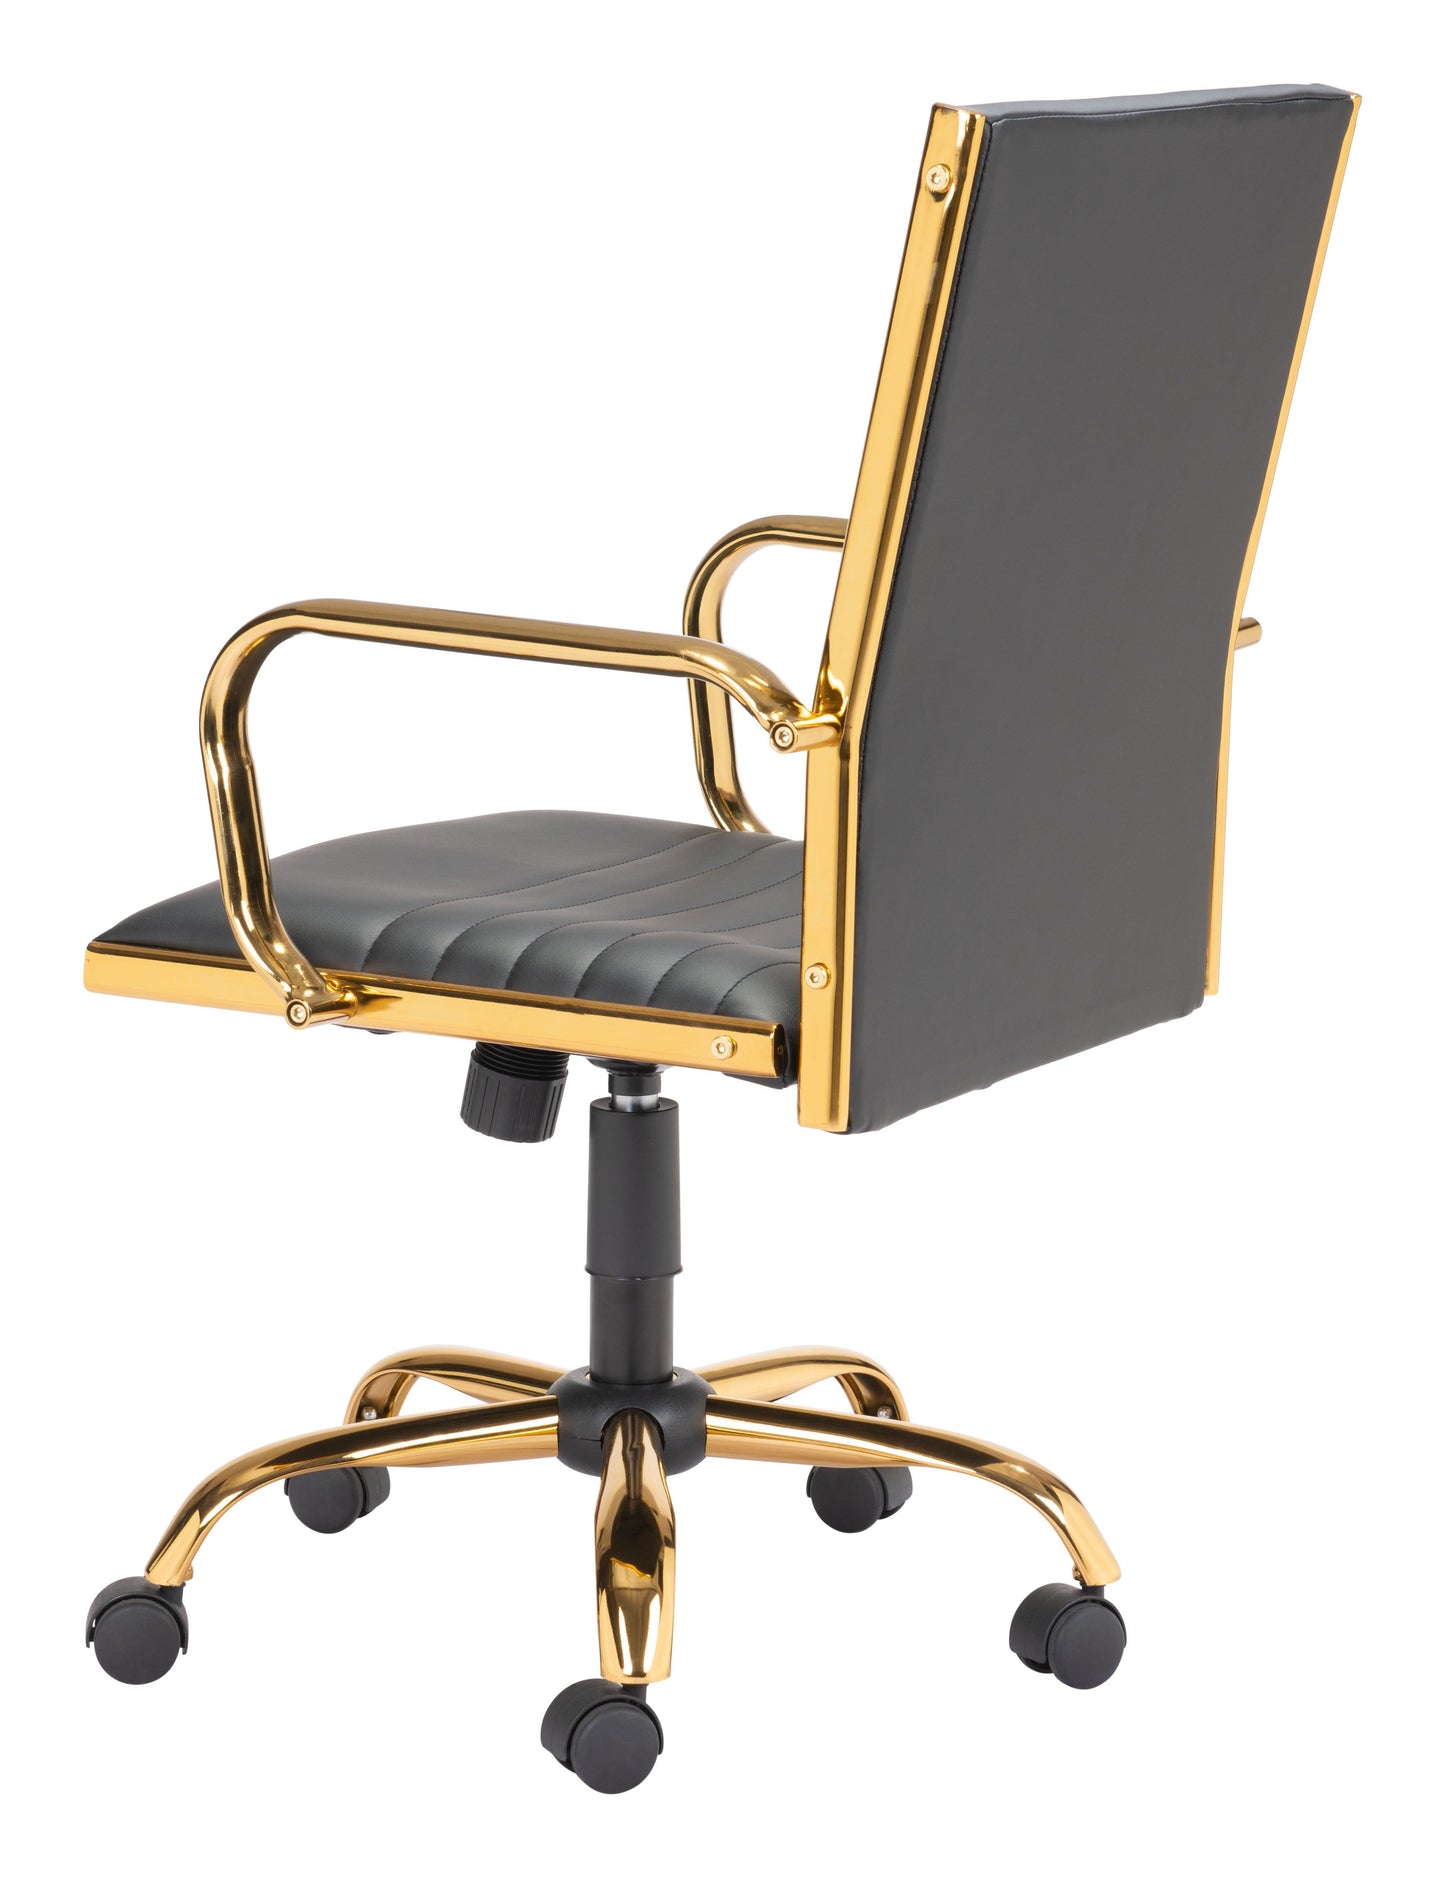 Profile Office Chair Black & Gold